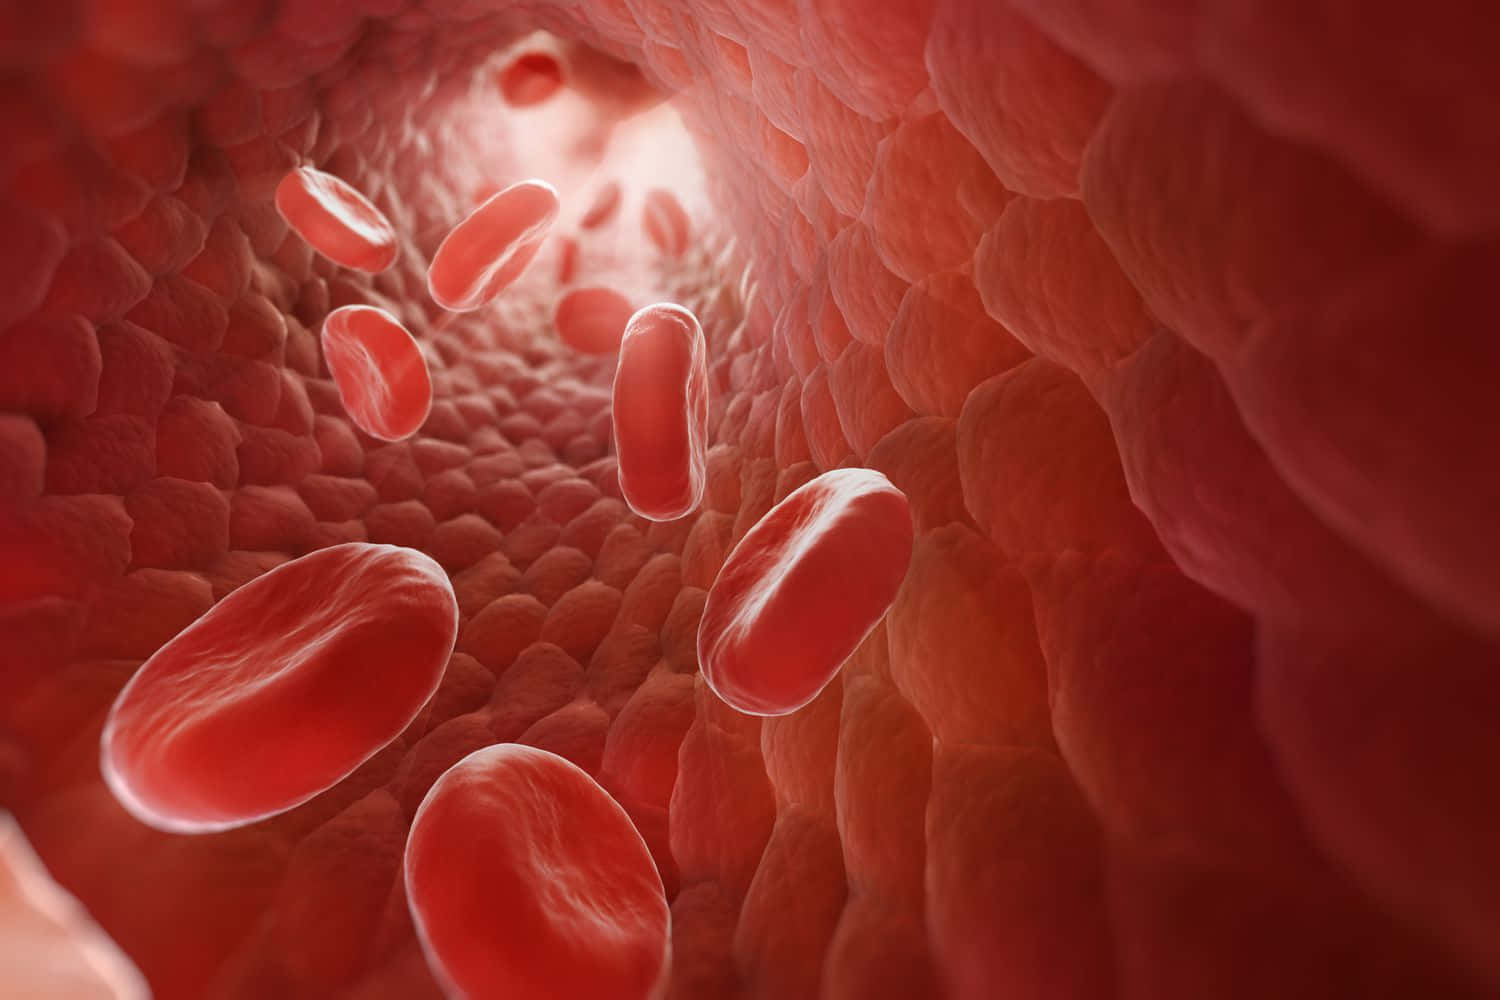 Red Blood Cells in action Wallpaper